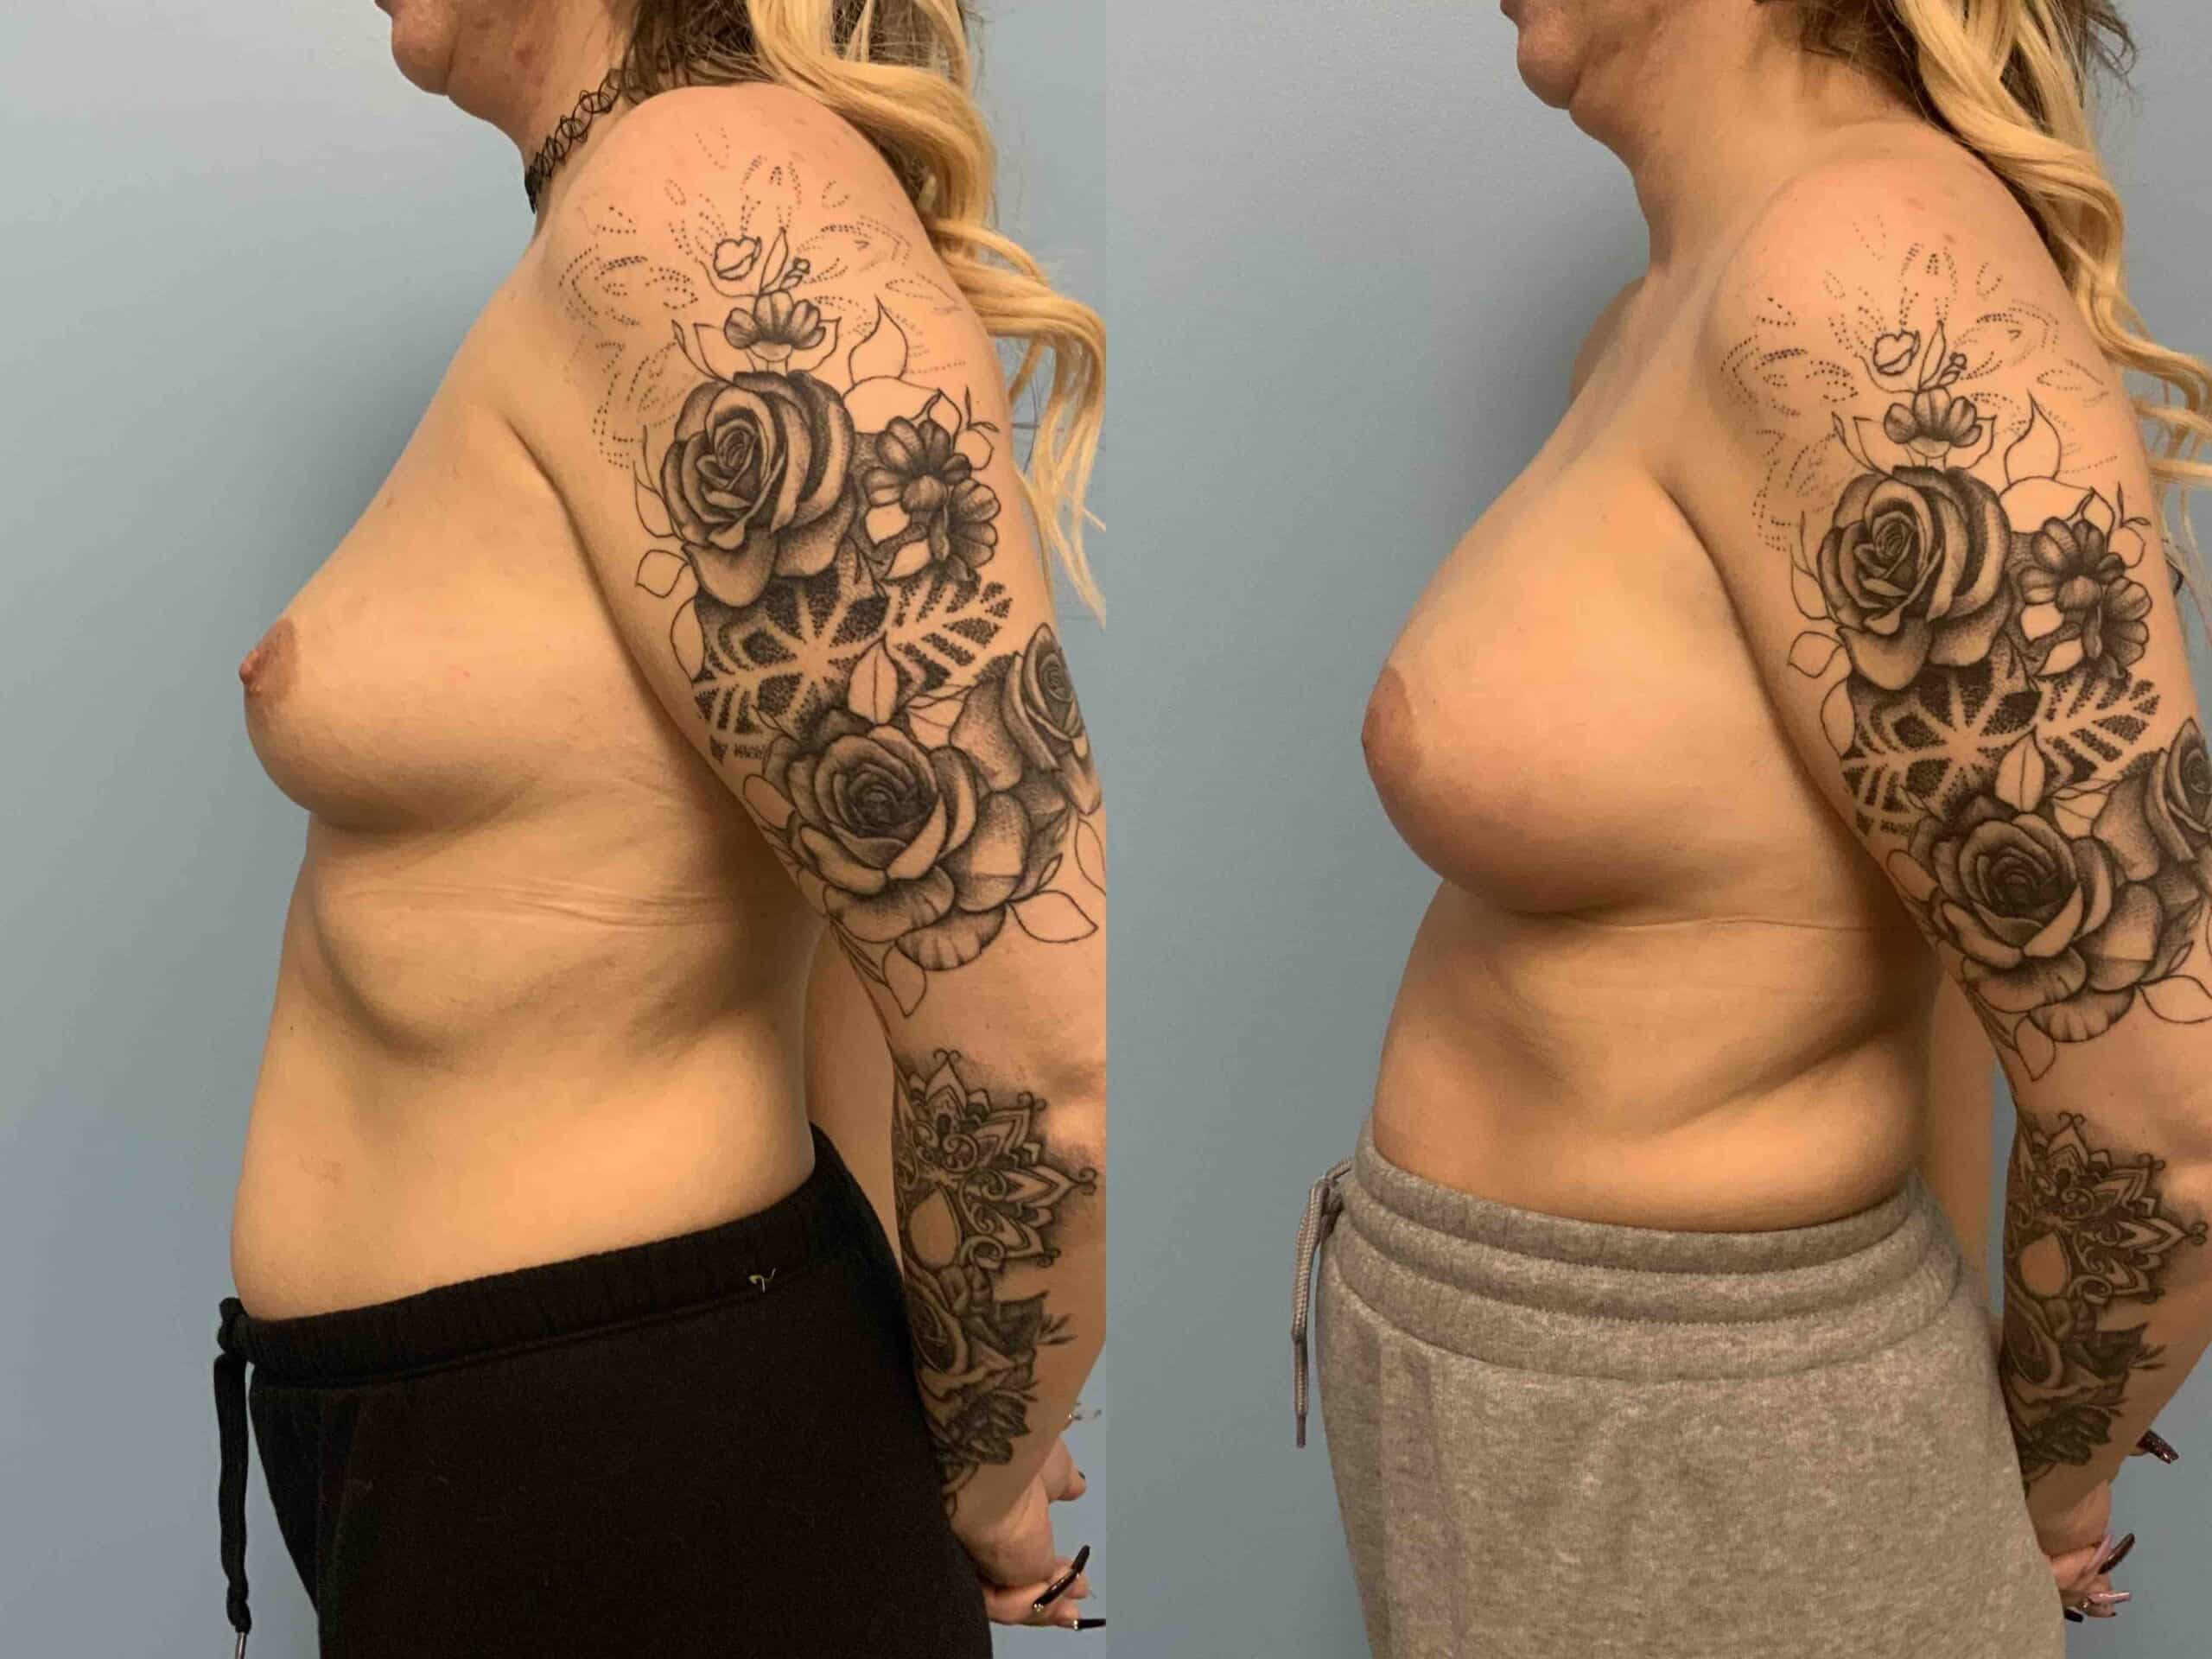 Before and after, 1 mo post op from Breast Augmentation, Level III Muscle Release performed by Dr. Paul Vanek (side view)